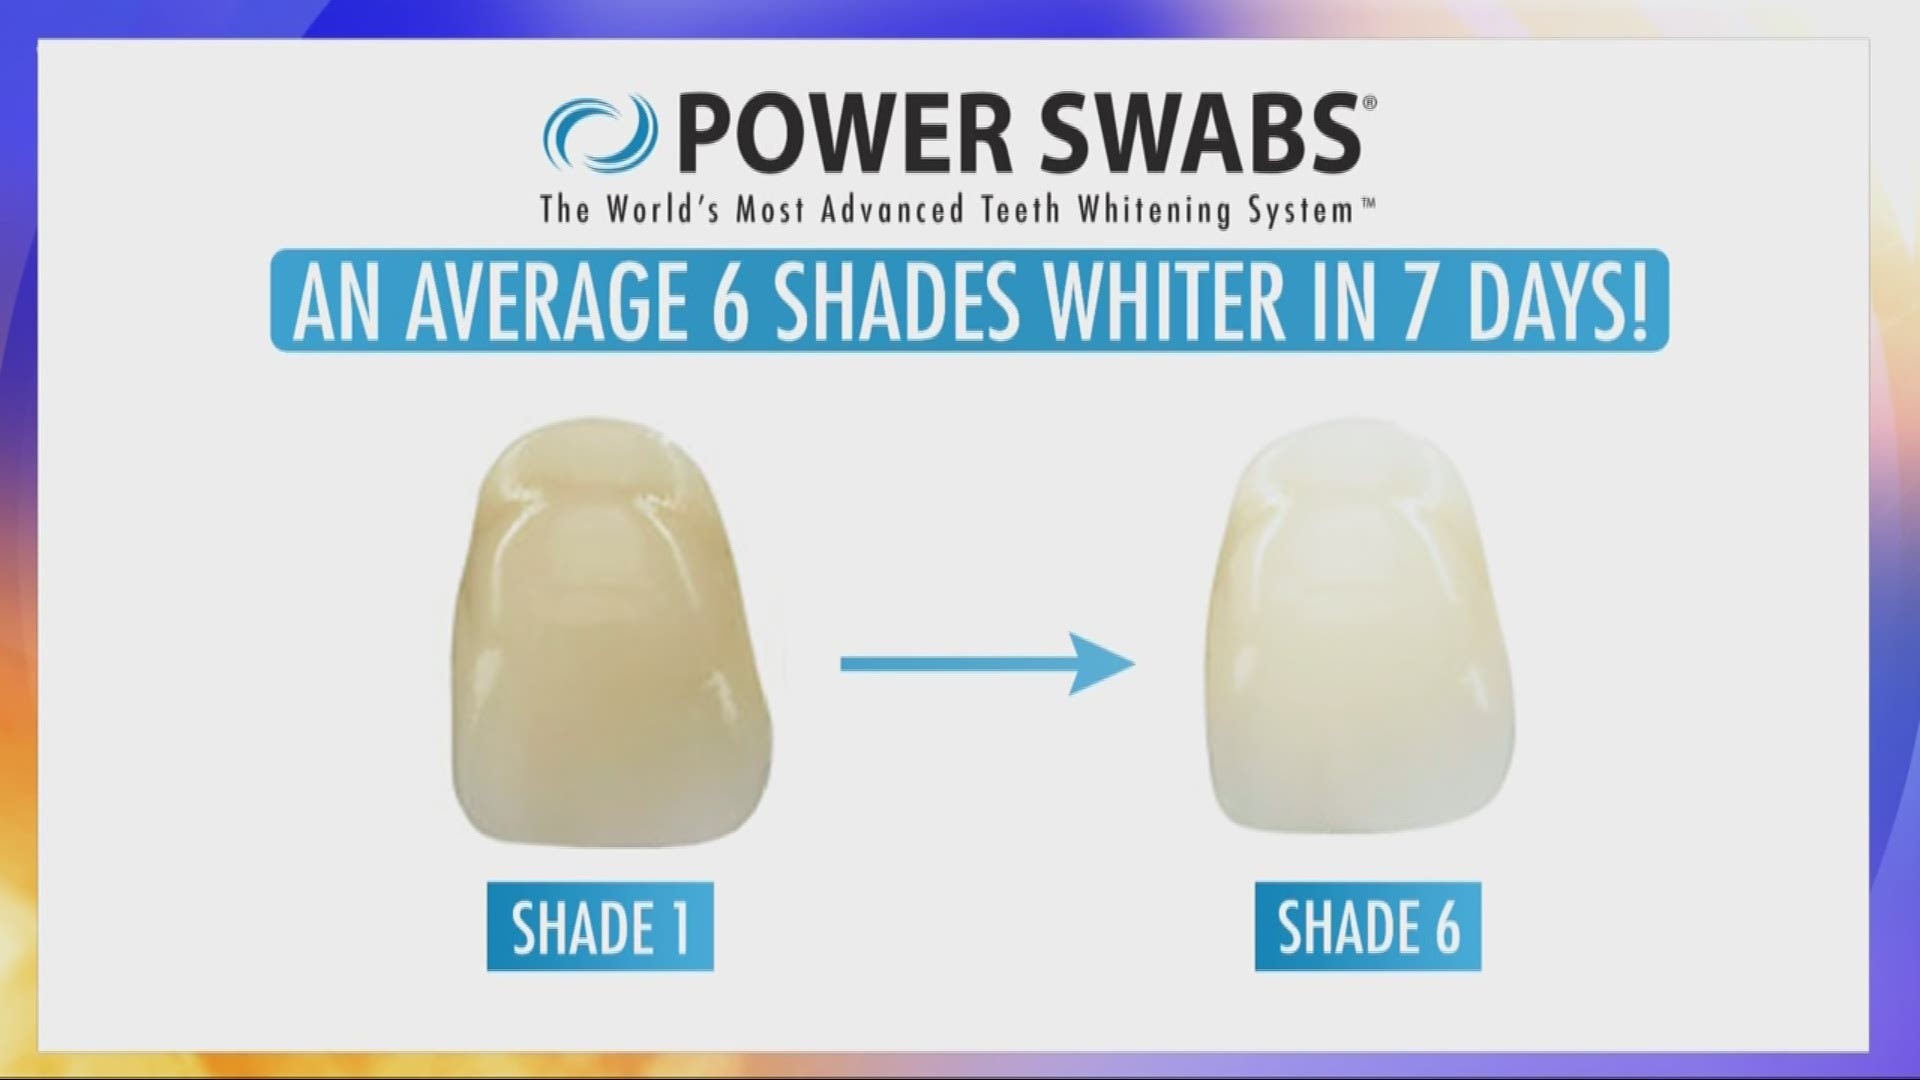 Powerswabs’ application is quick and effective so it doesn’t take up valuable time and you see results for whiter teeth.